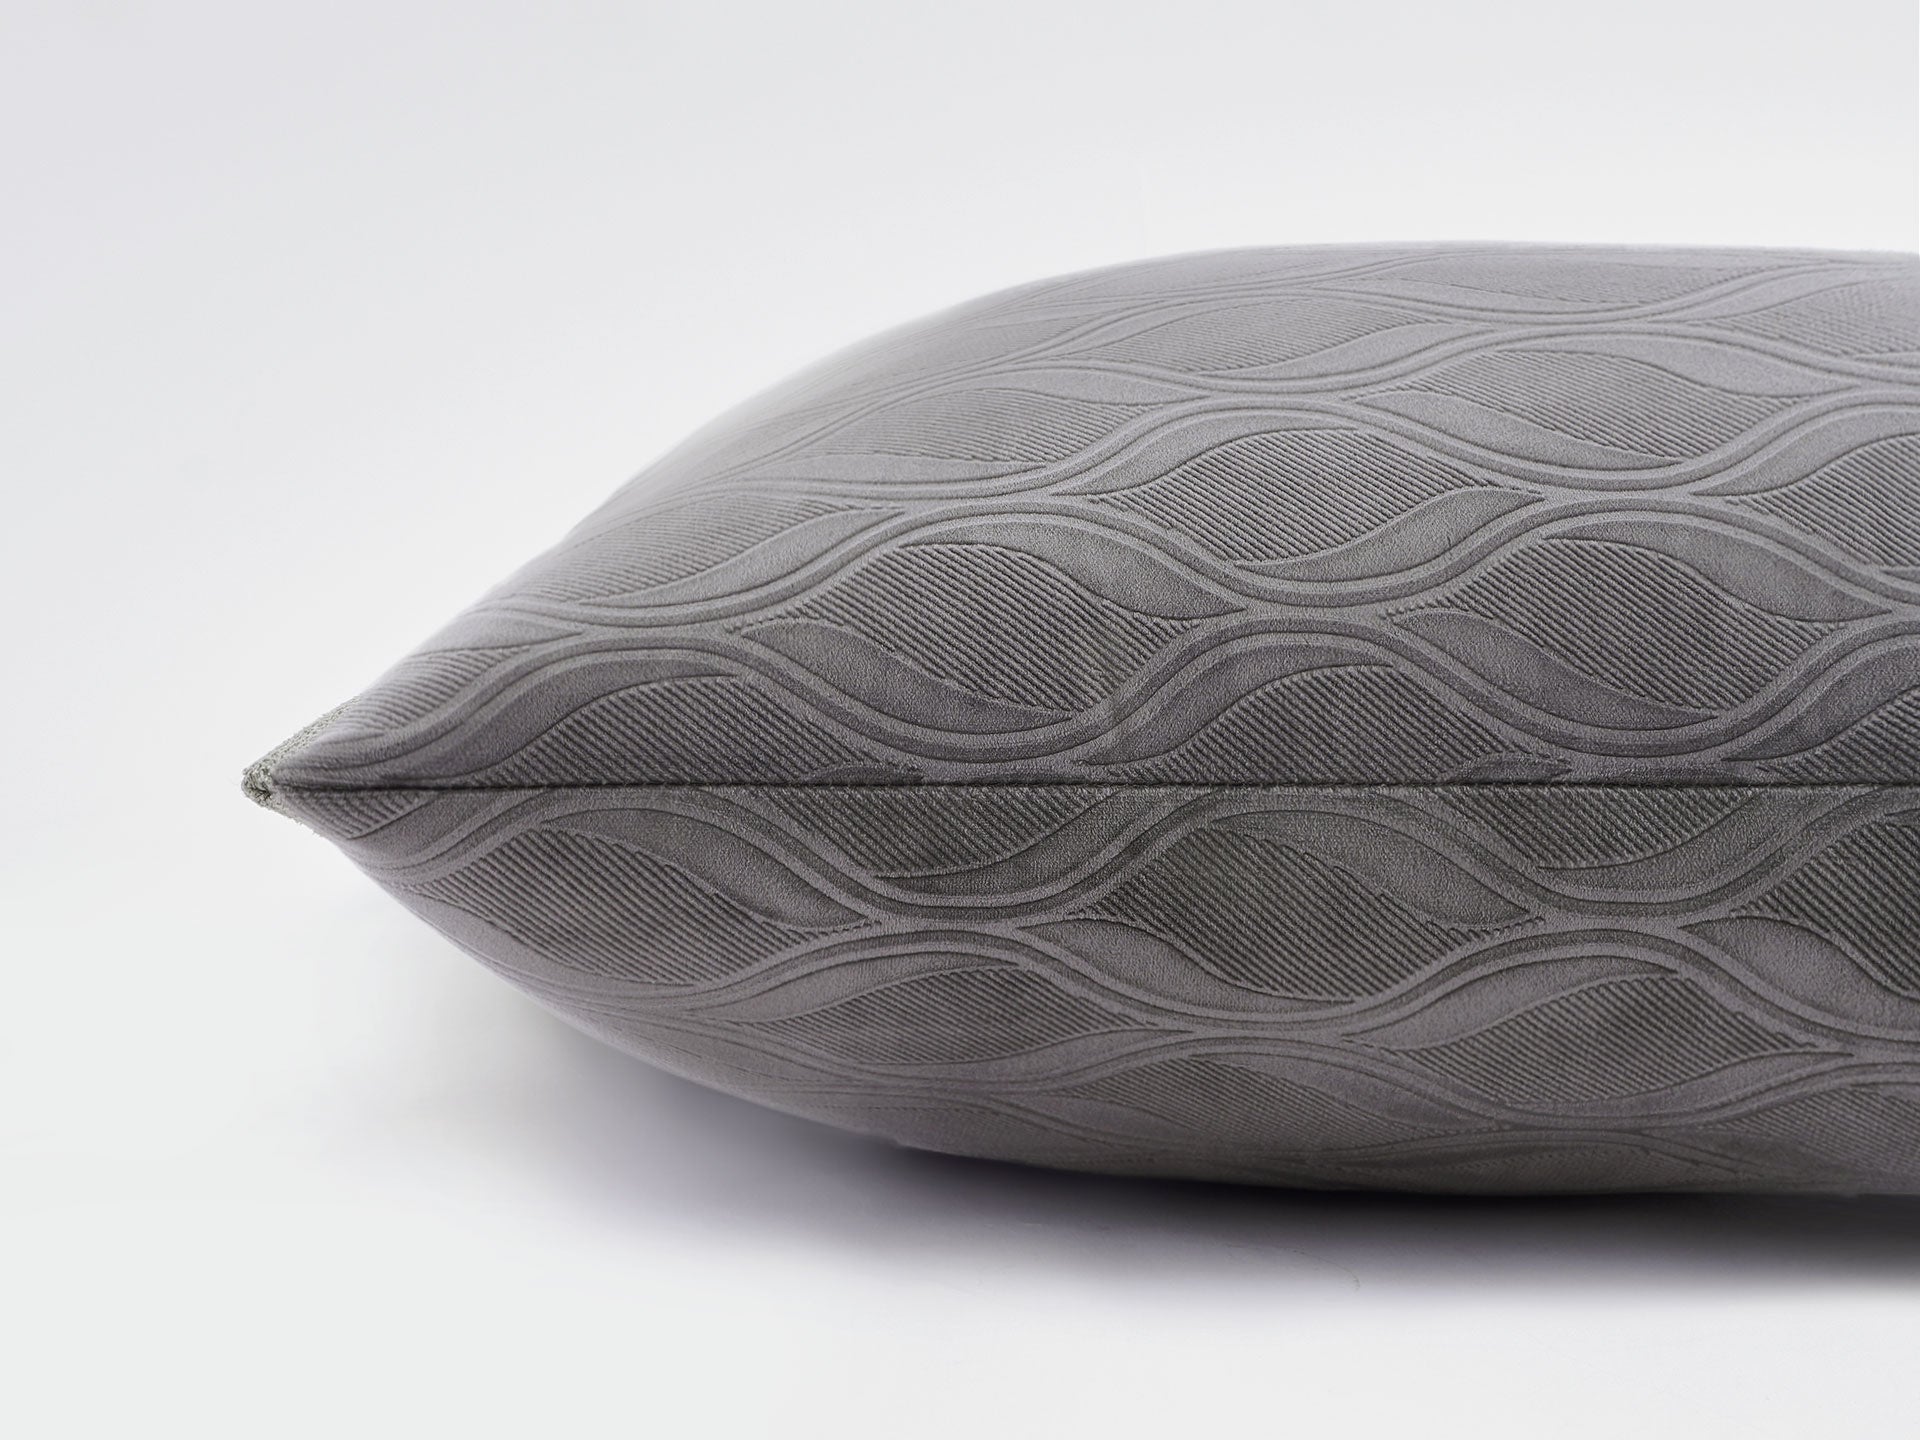 Modern Geometry Decorative Throw Pillow Covers